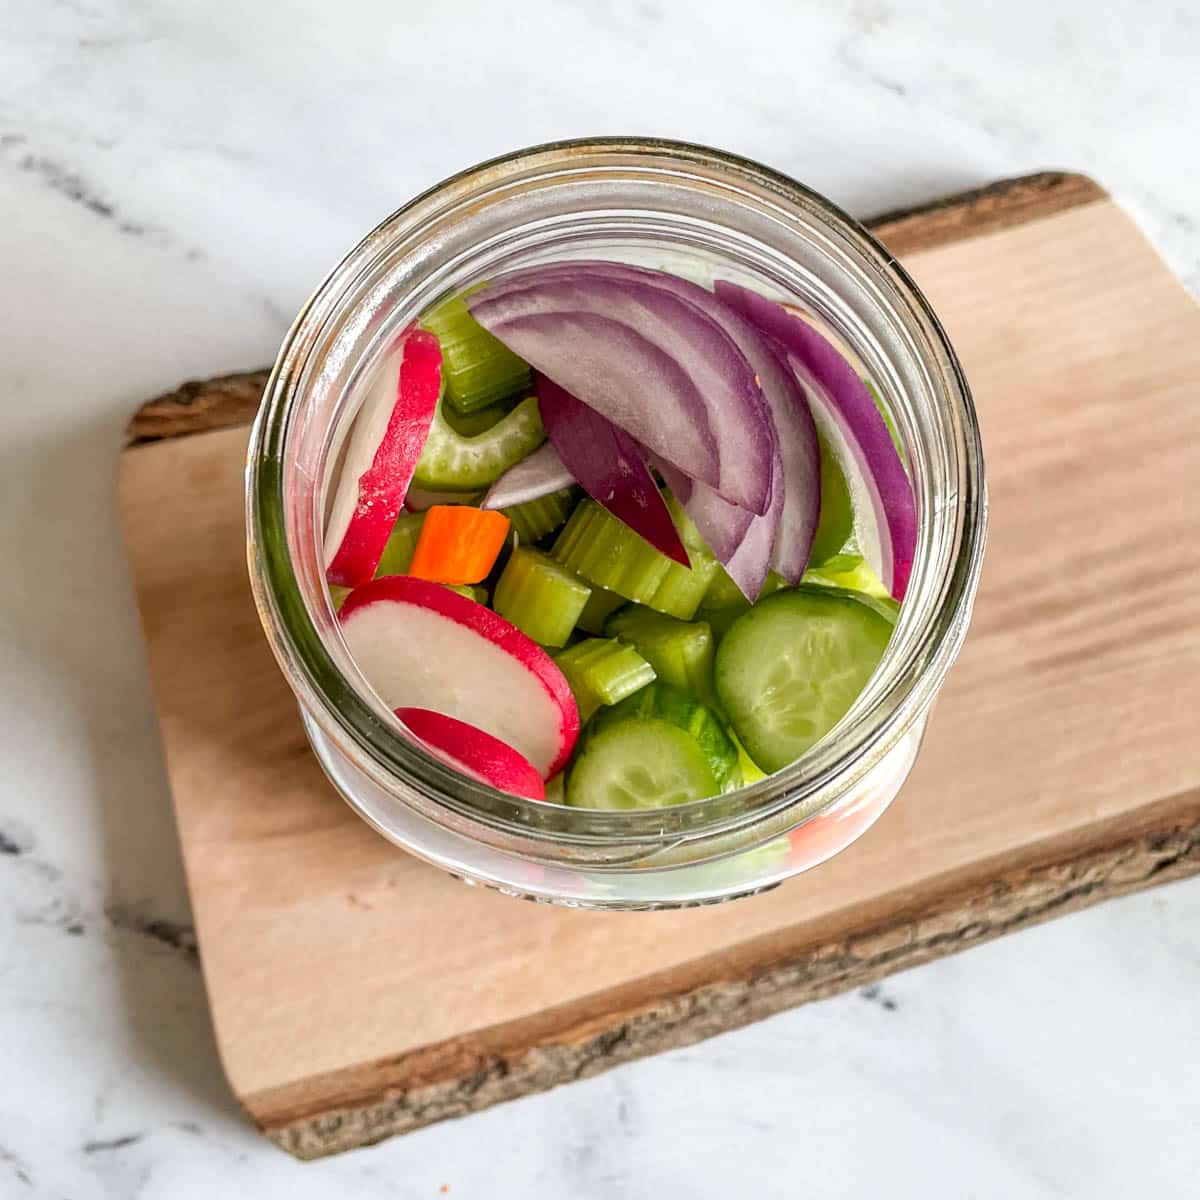 Mixed, cut vegetables are shown in a glass jar.